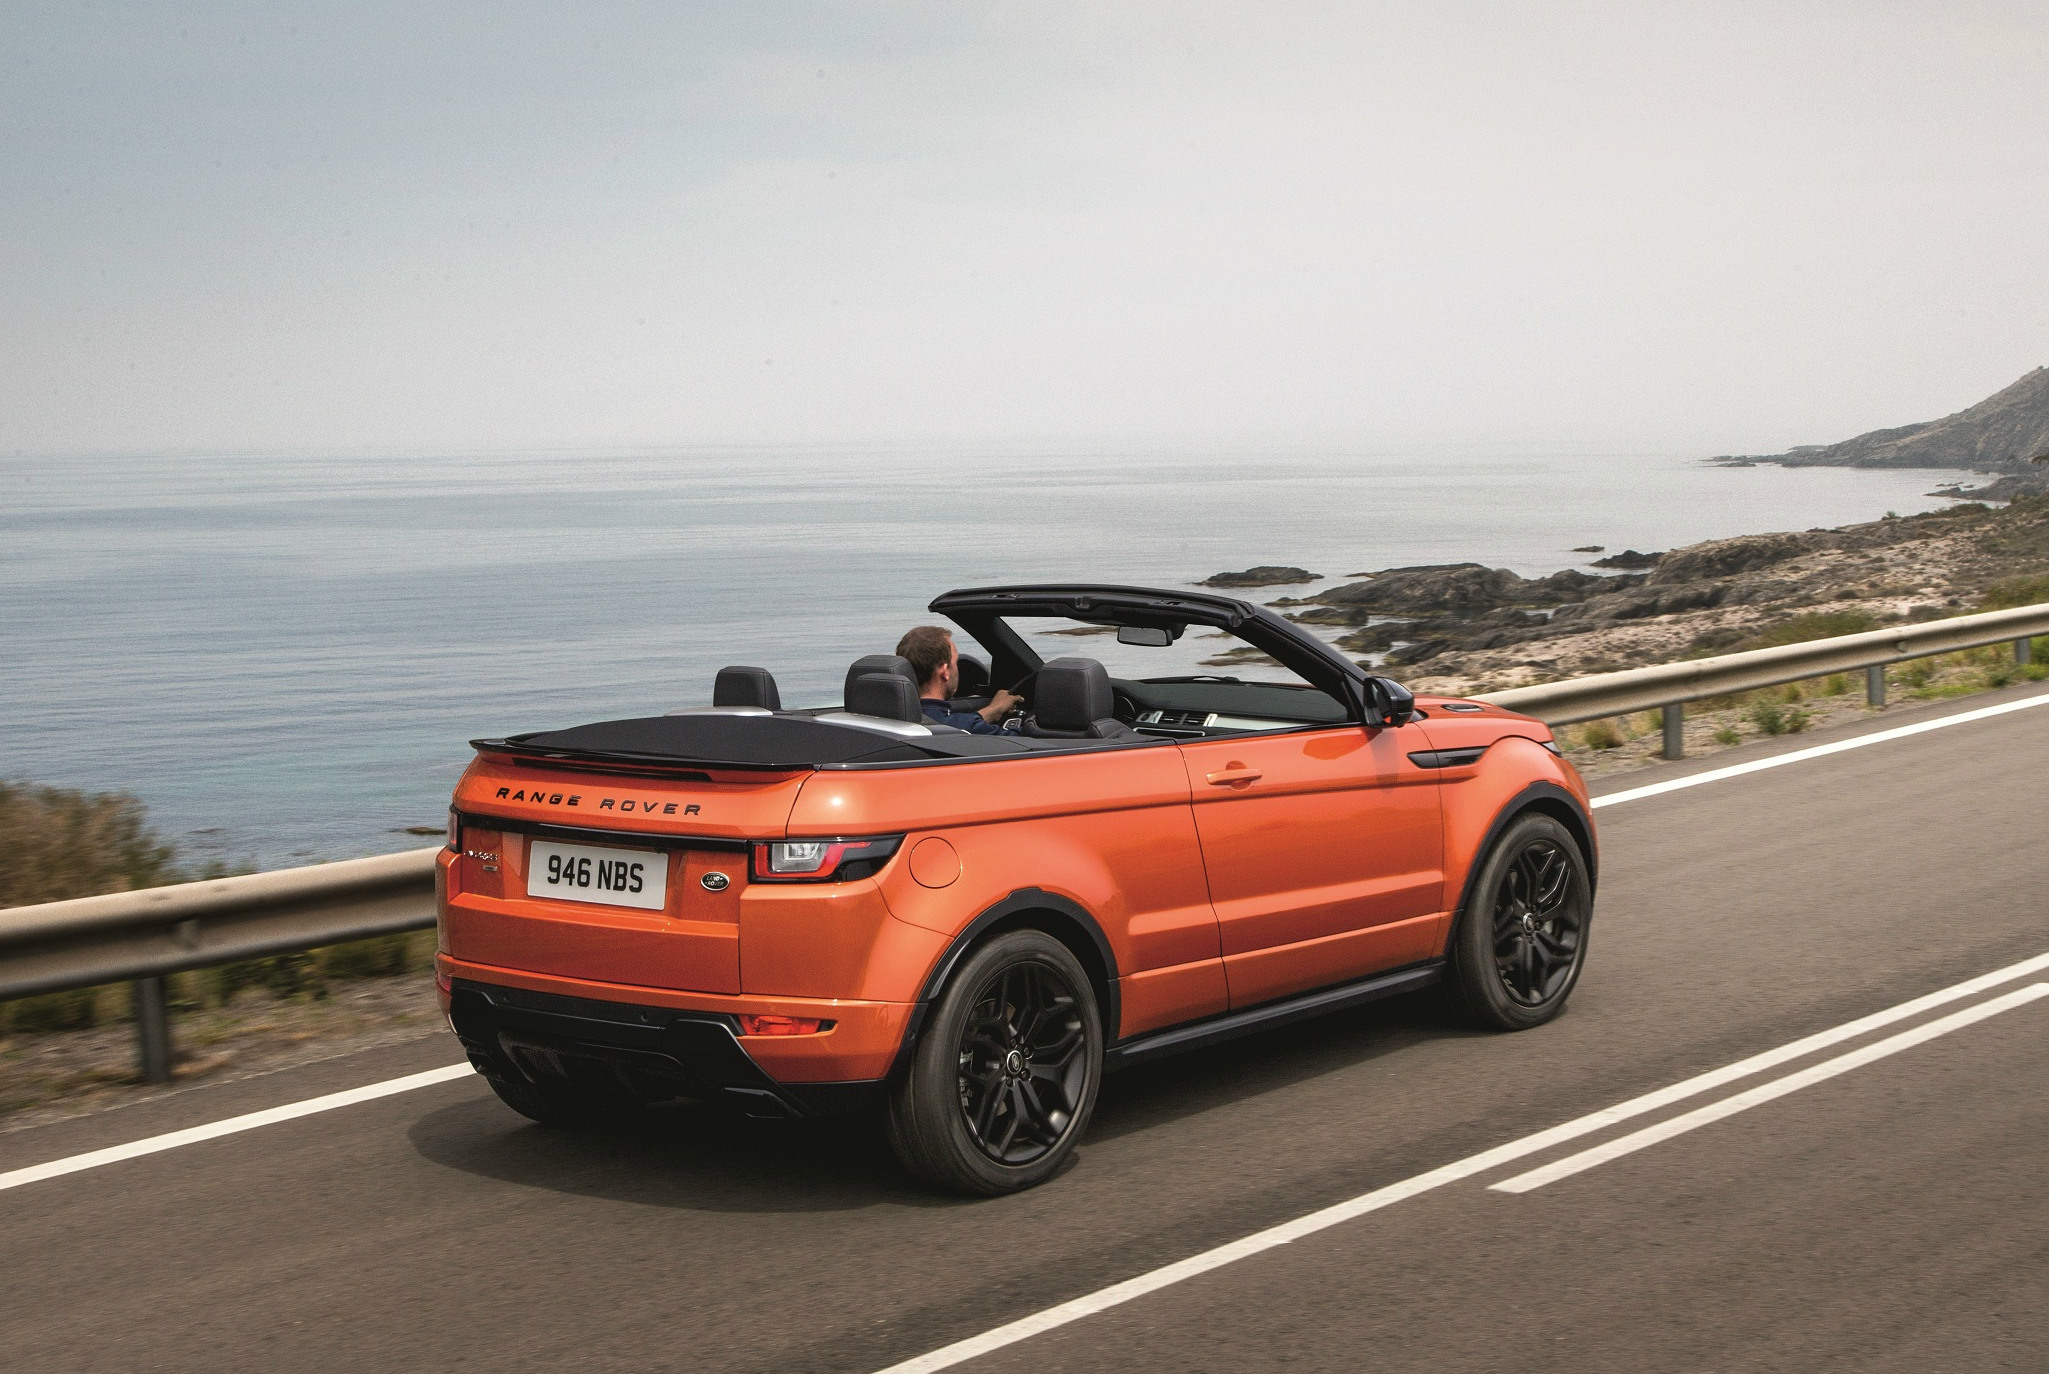 Preview of the 2015 Los Angeles motor show, including Range Rover Evoque convertible